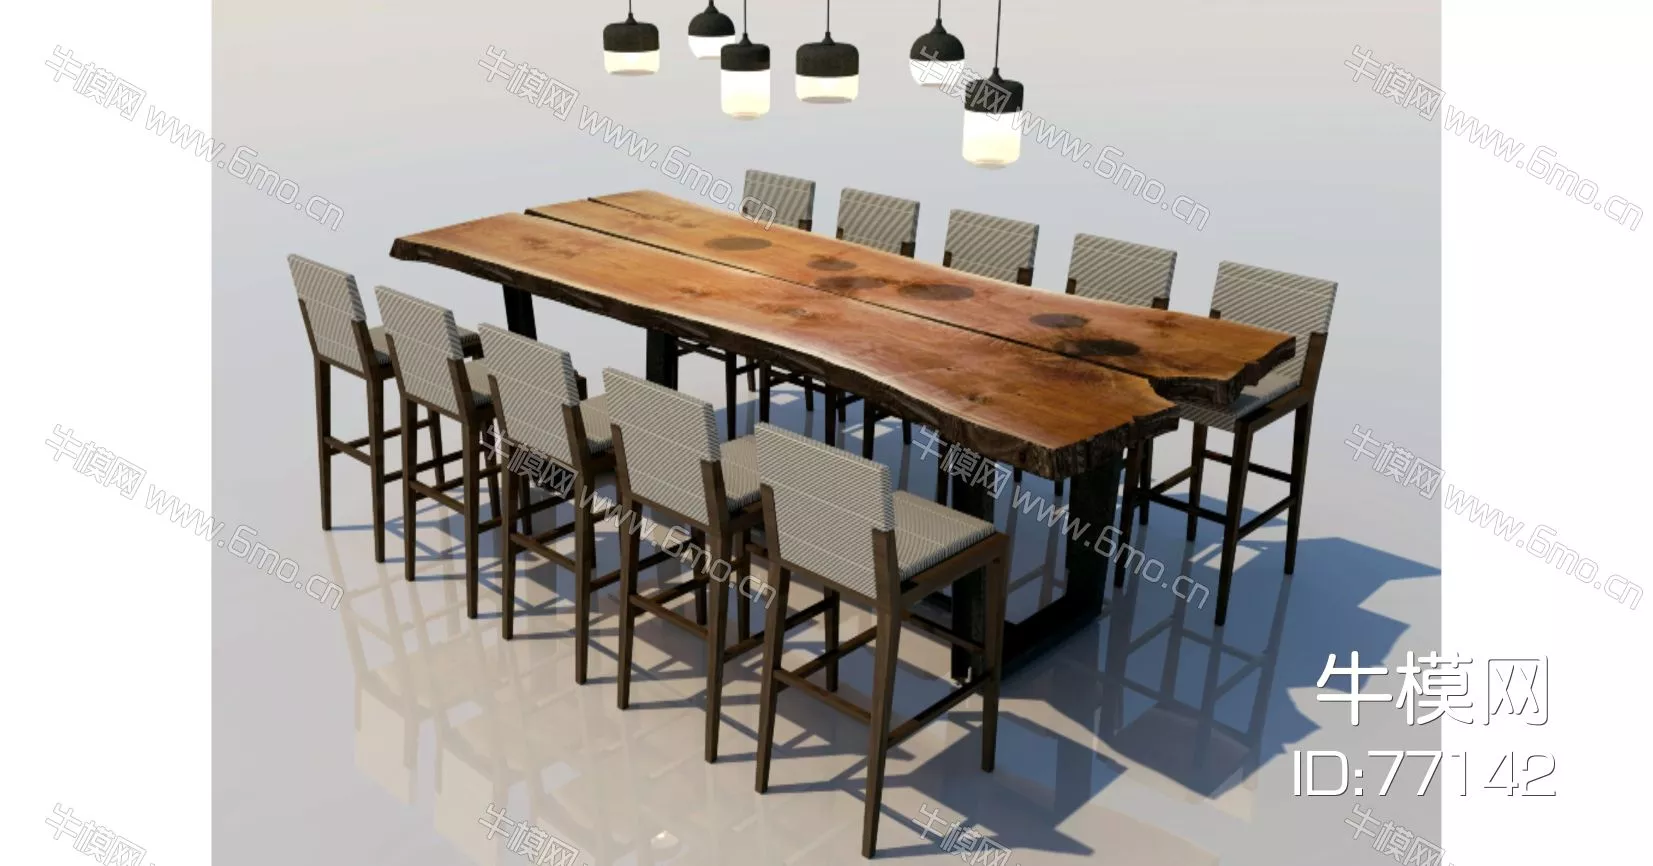 MINIMALIST DINING TABLE SET - SKETCHUP 3D MODEL - VRAY - 77142